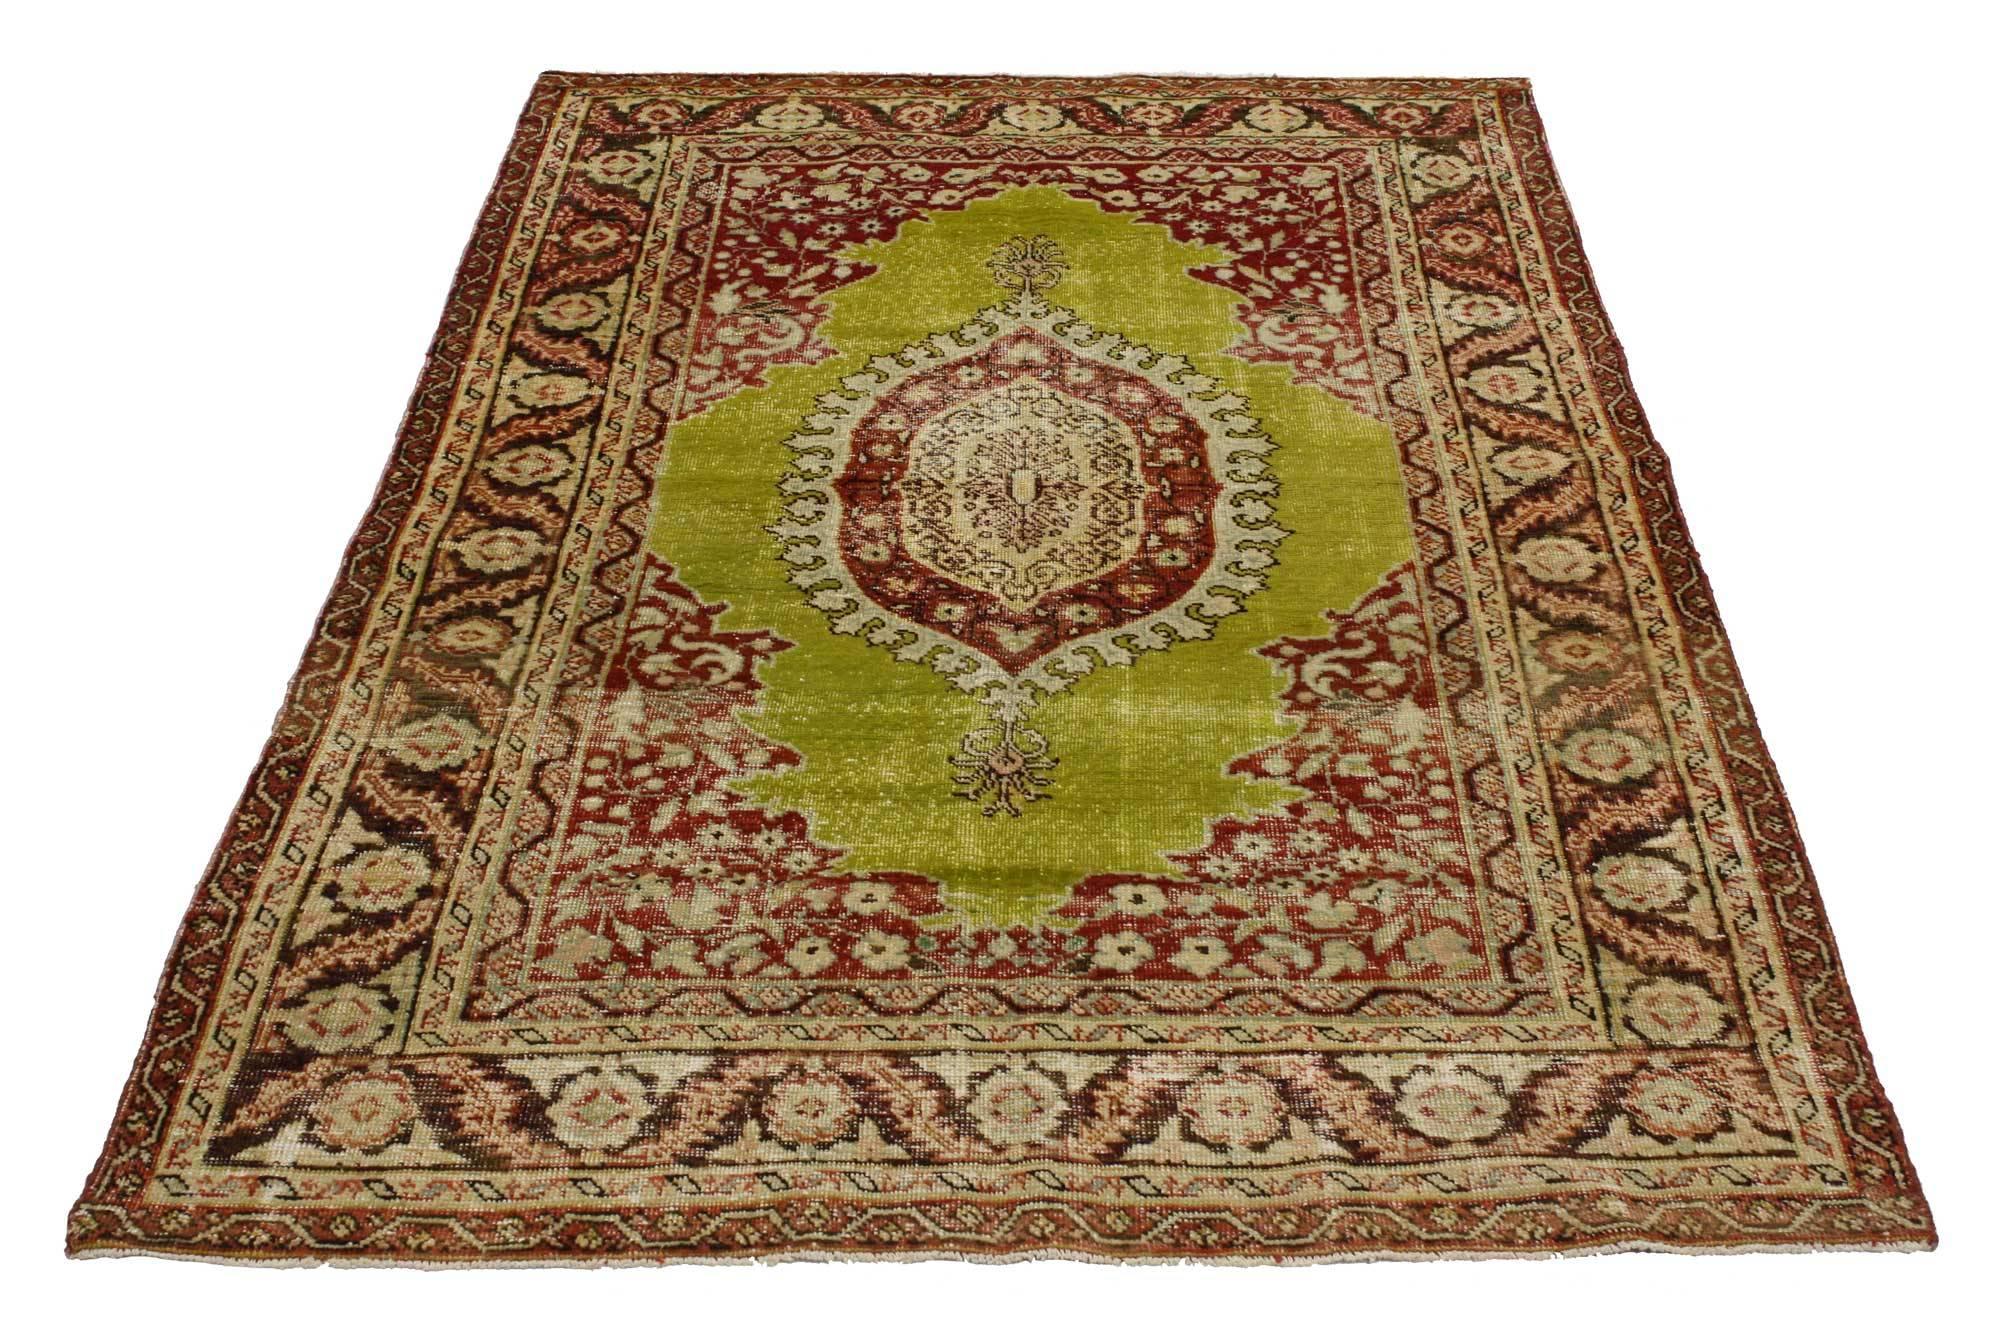 51698, Vintage Turkish Oushak Rug with Modern Traditional Style, Entry or Foyer Rug, 03'06 x 05'03. This hand-knotted wool opulent vintage Turkish Oushak rug features a large central cusped medallion in brick red and beige in an open and abrashed